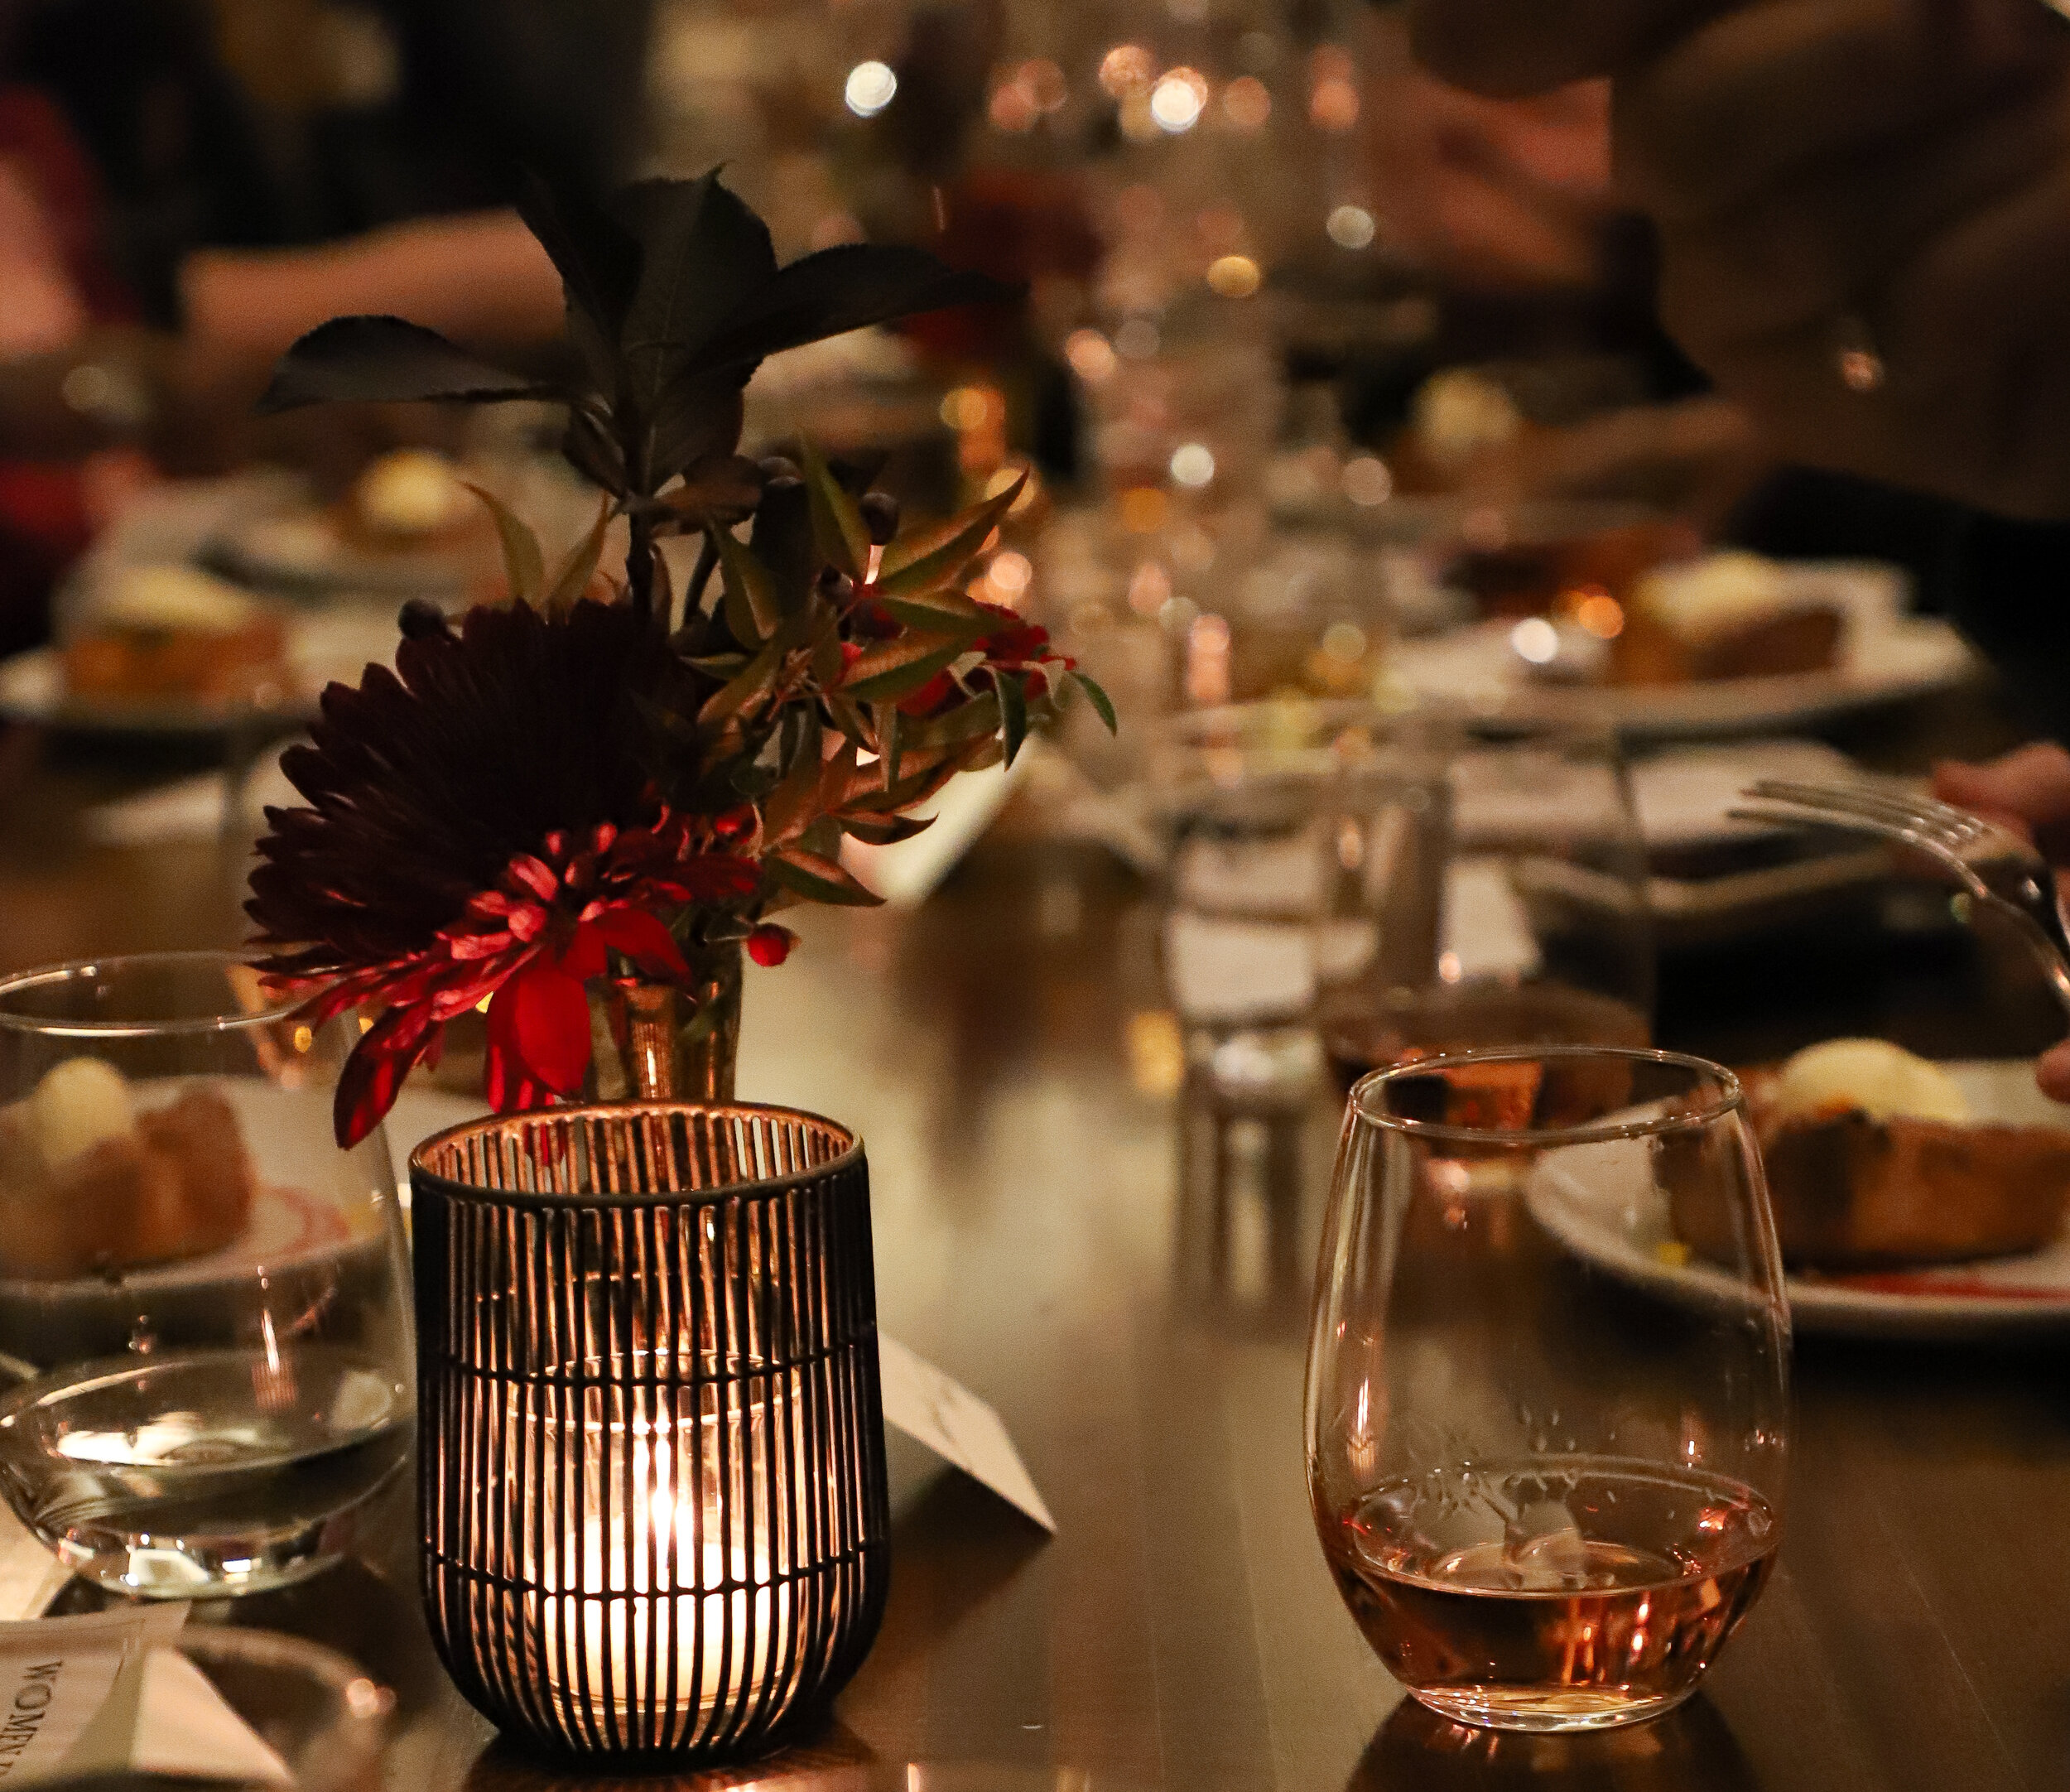 Intimate ambiance captured in a close-up of a candlelit dining experience.